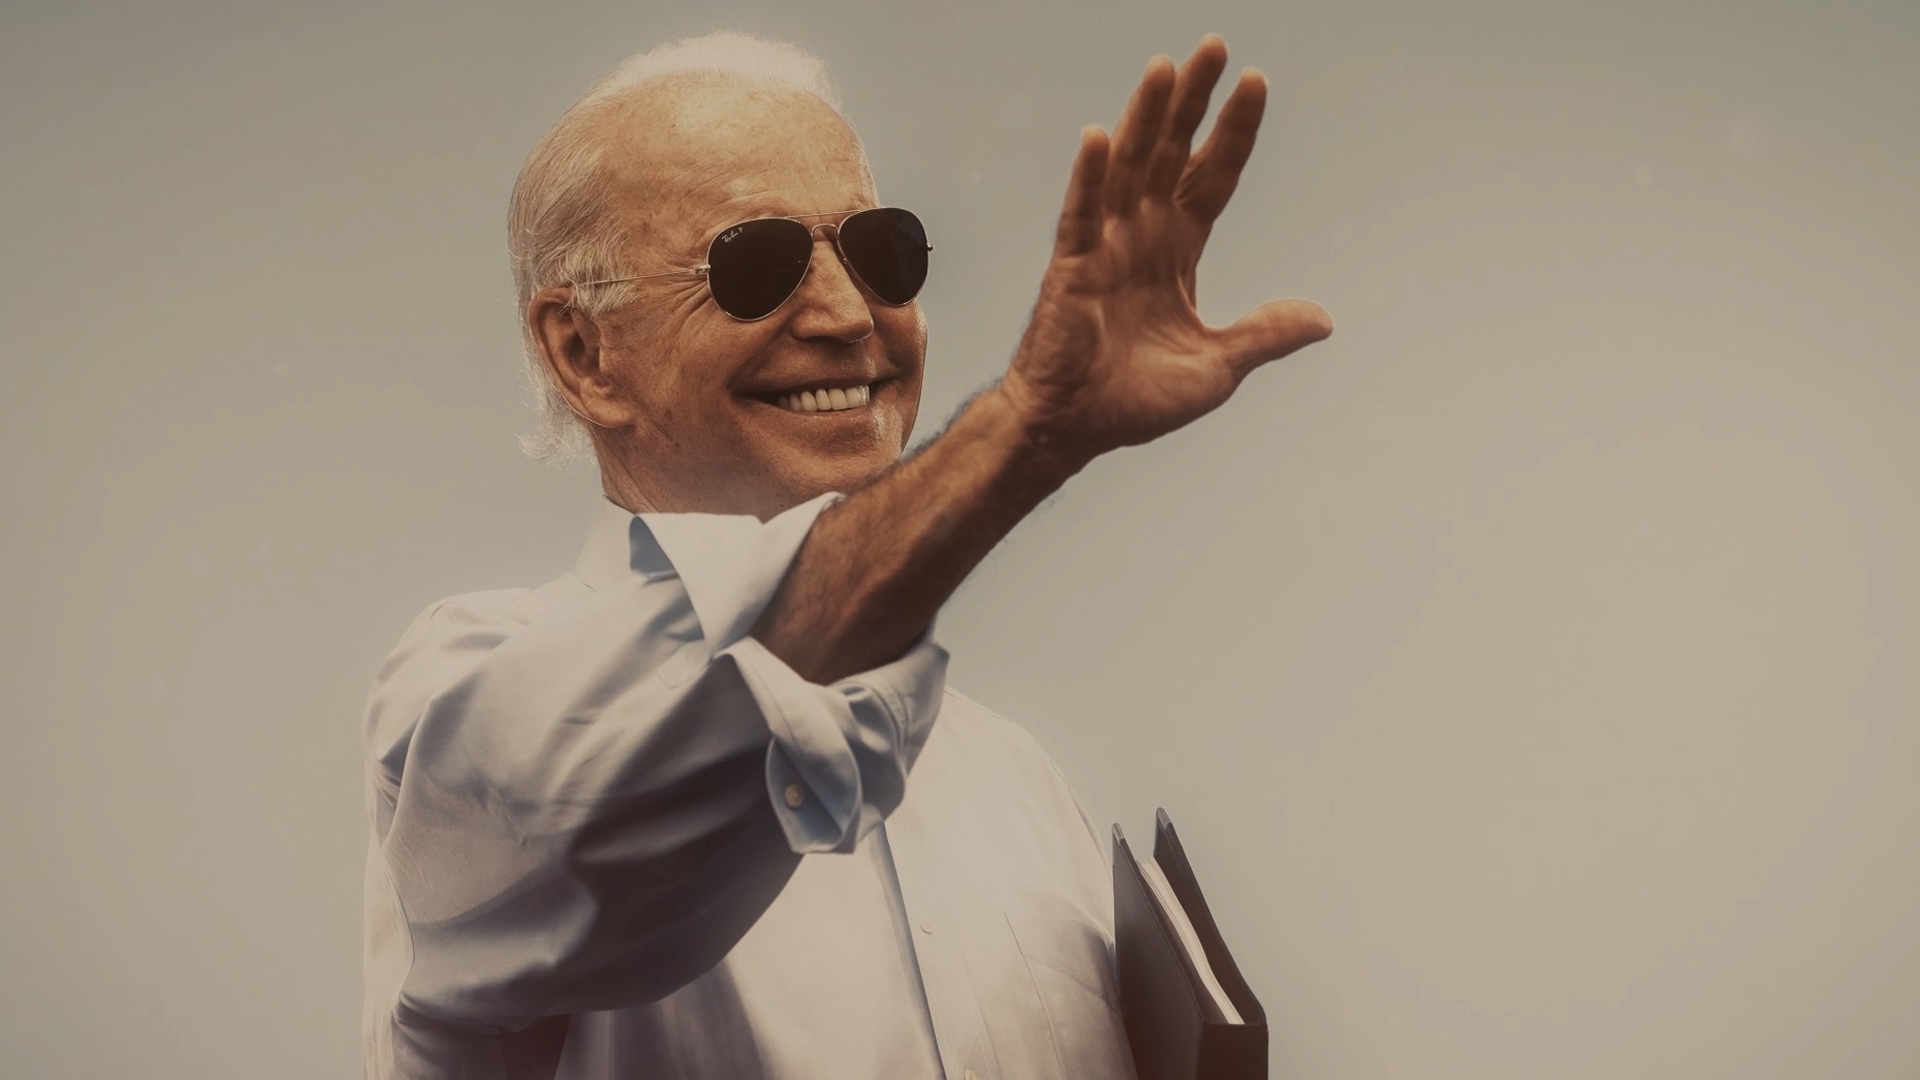 President Biden wearing aviators waves to someone not pictured